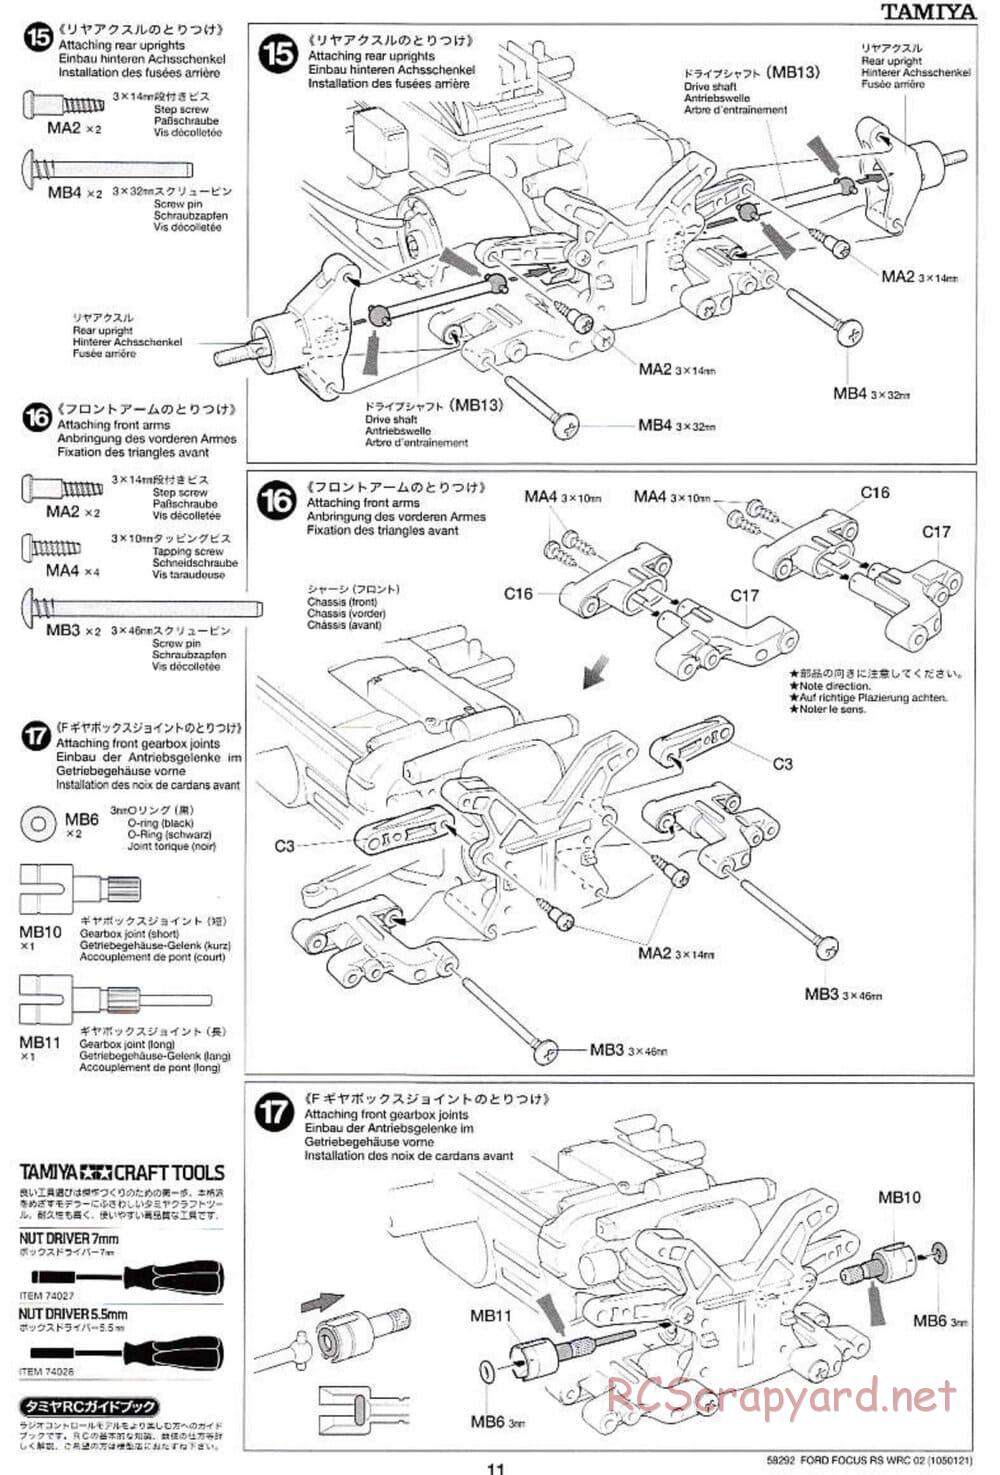 Tamiya - Ford Focus RS WRC 02 - TL-01 Chassis - Manual - Page 11